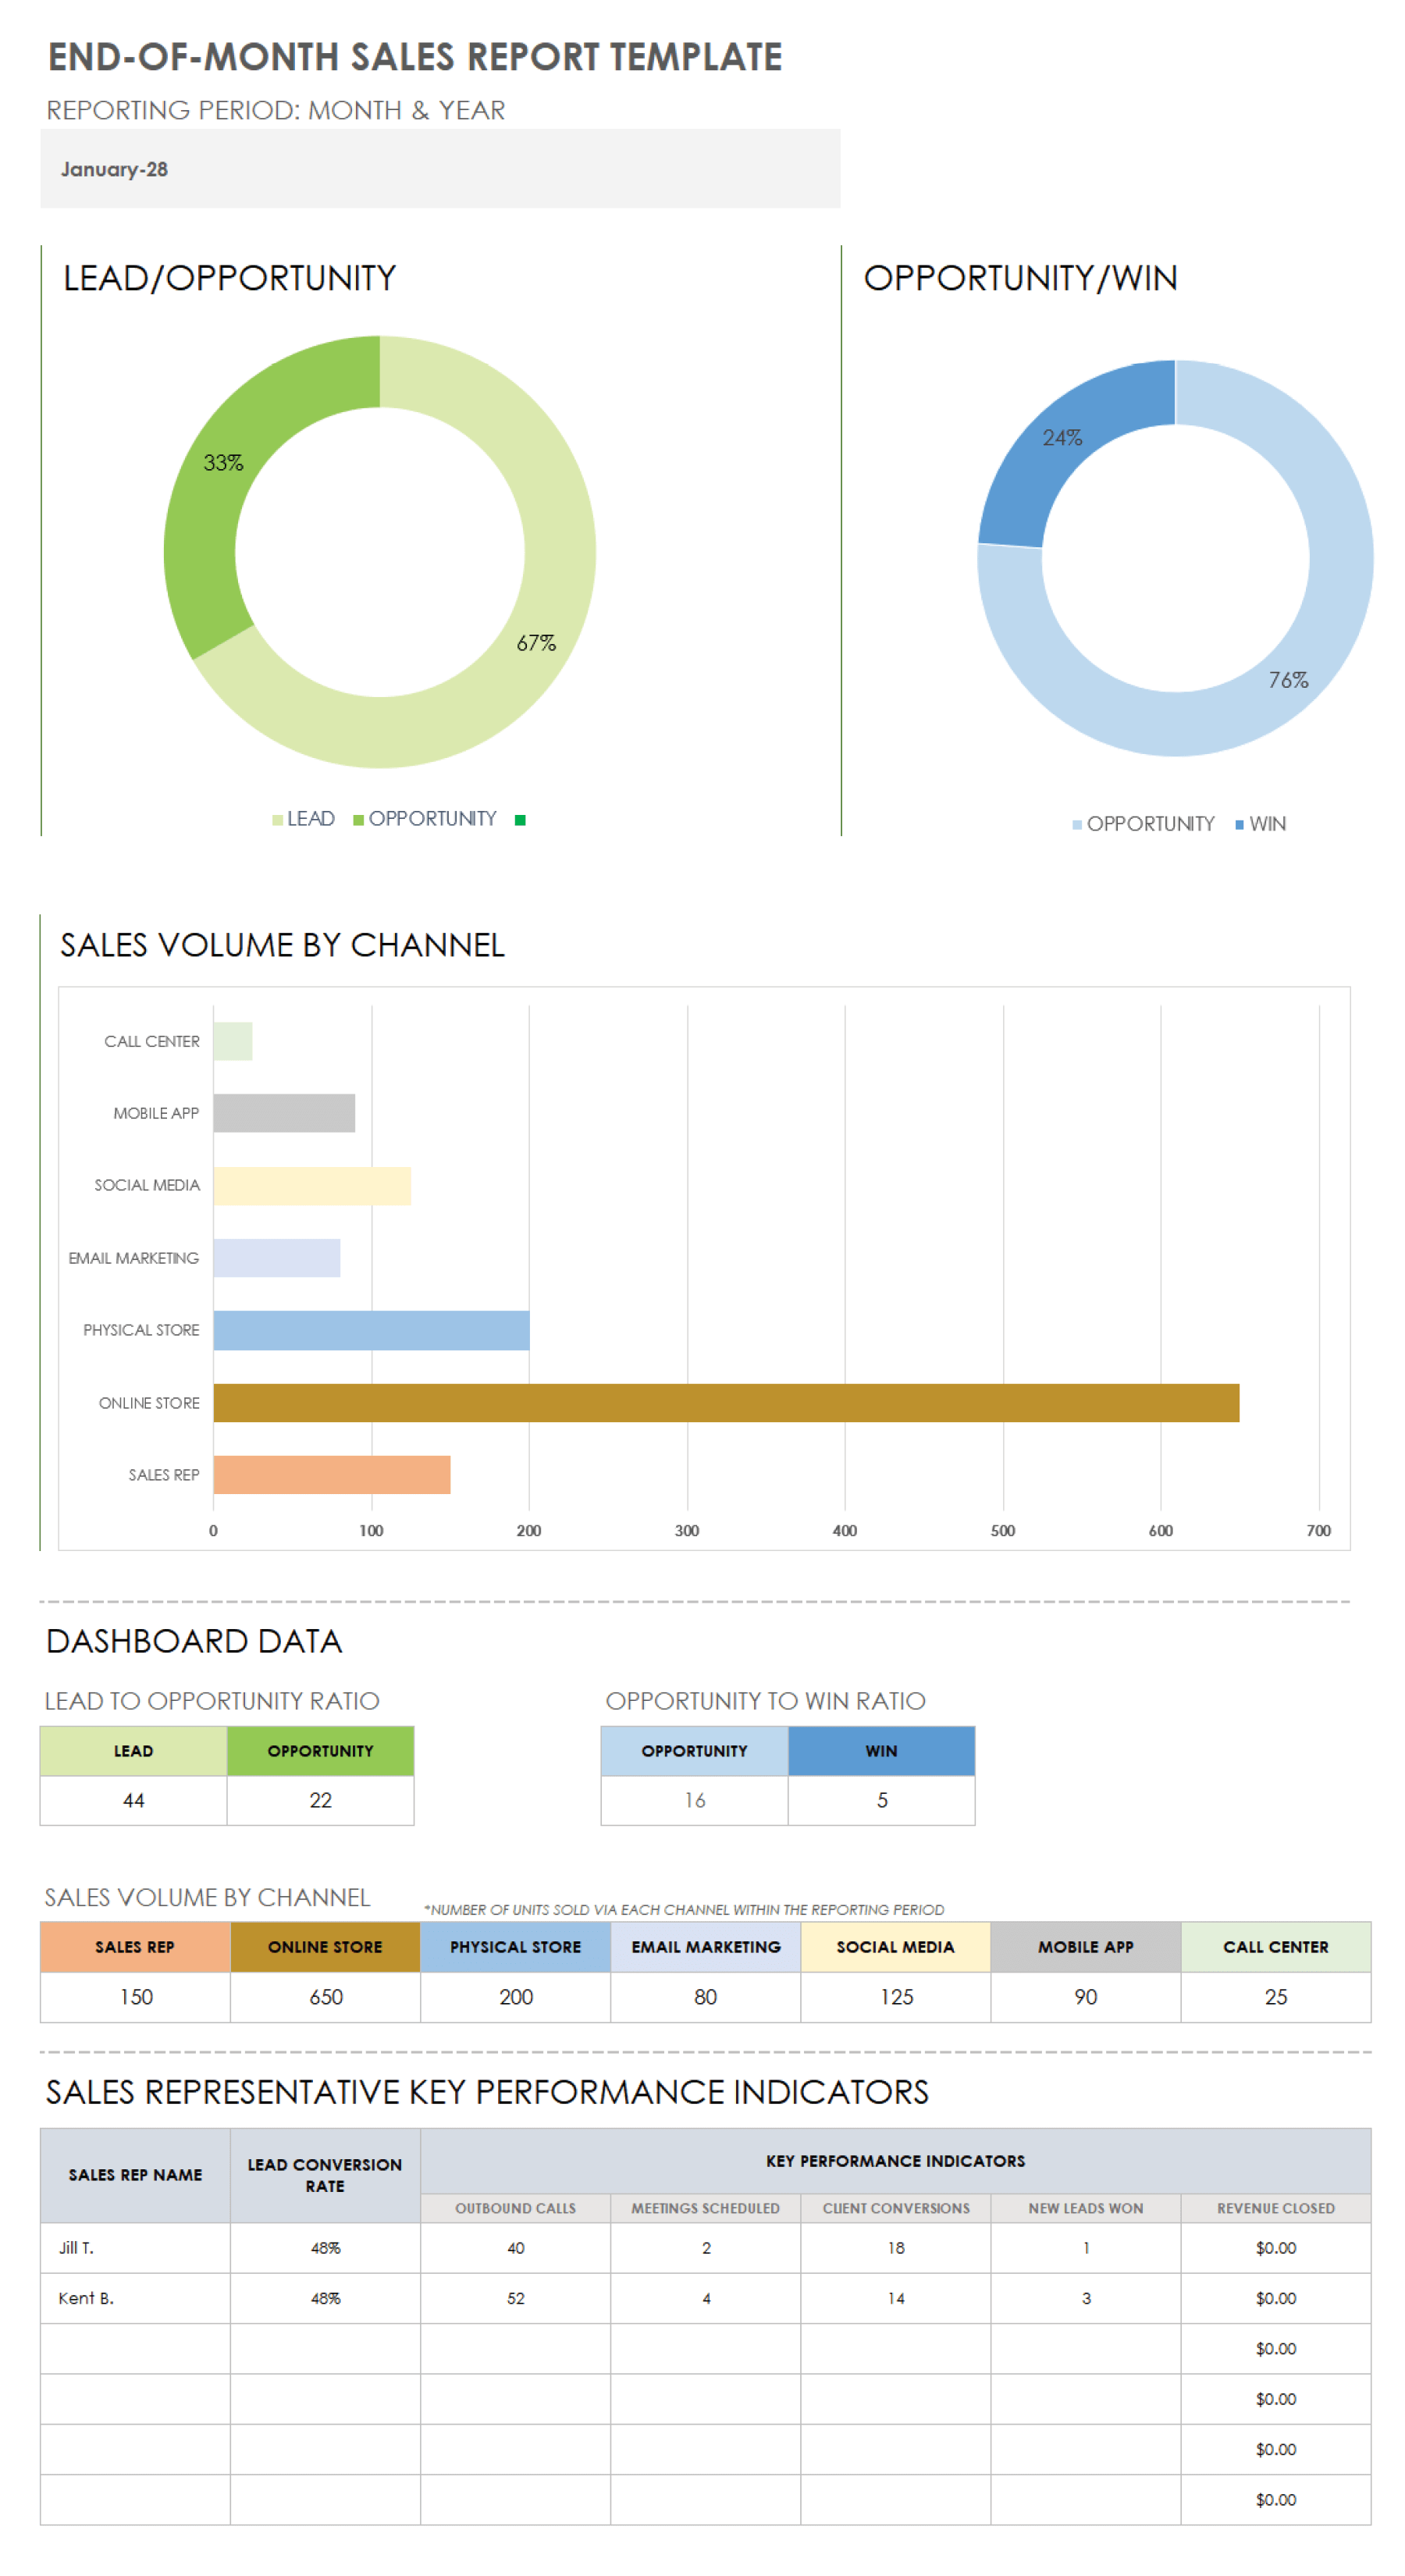 End-of-Month Sales Report Template